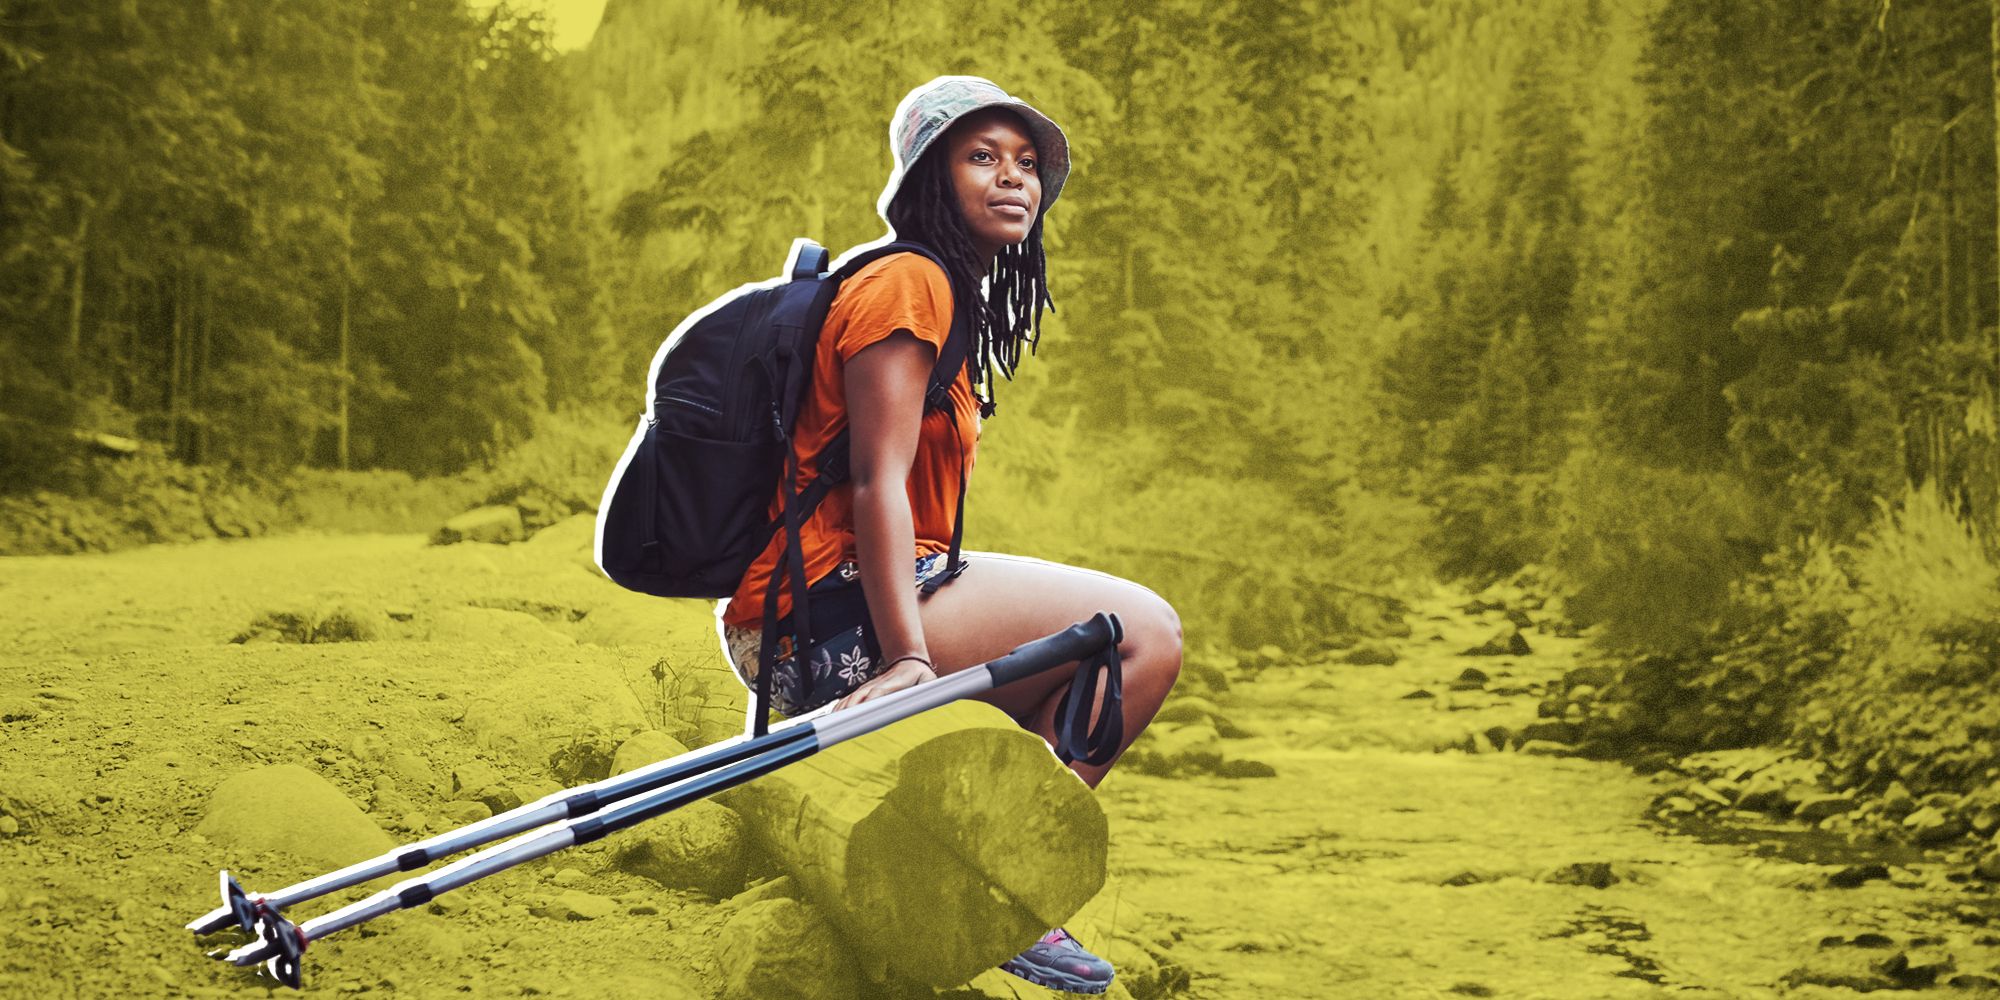 How to dress for hiking The 3-layer technique!